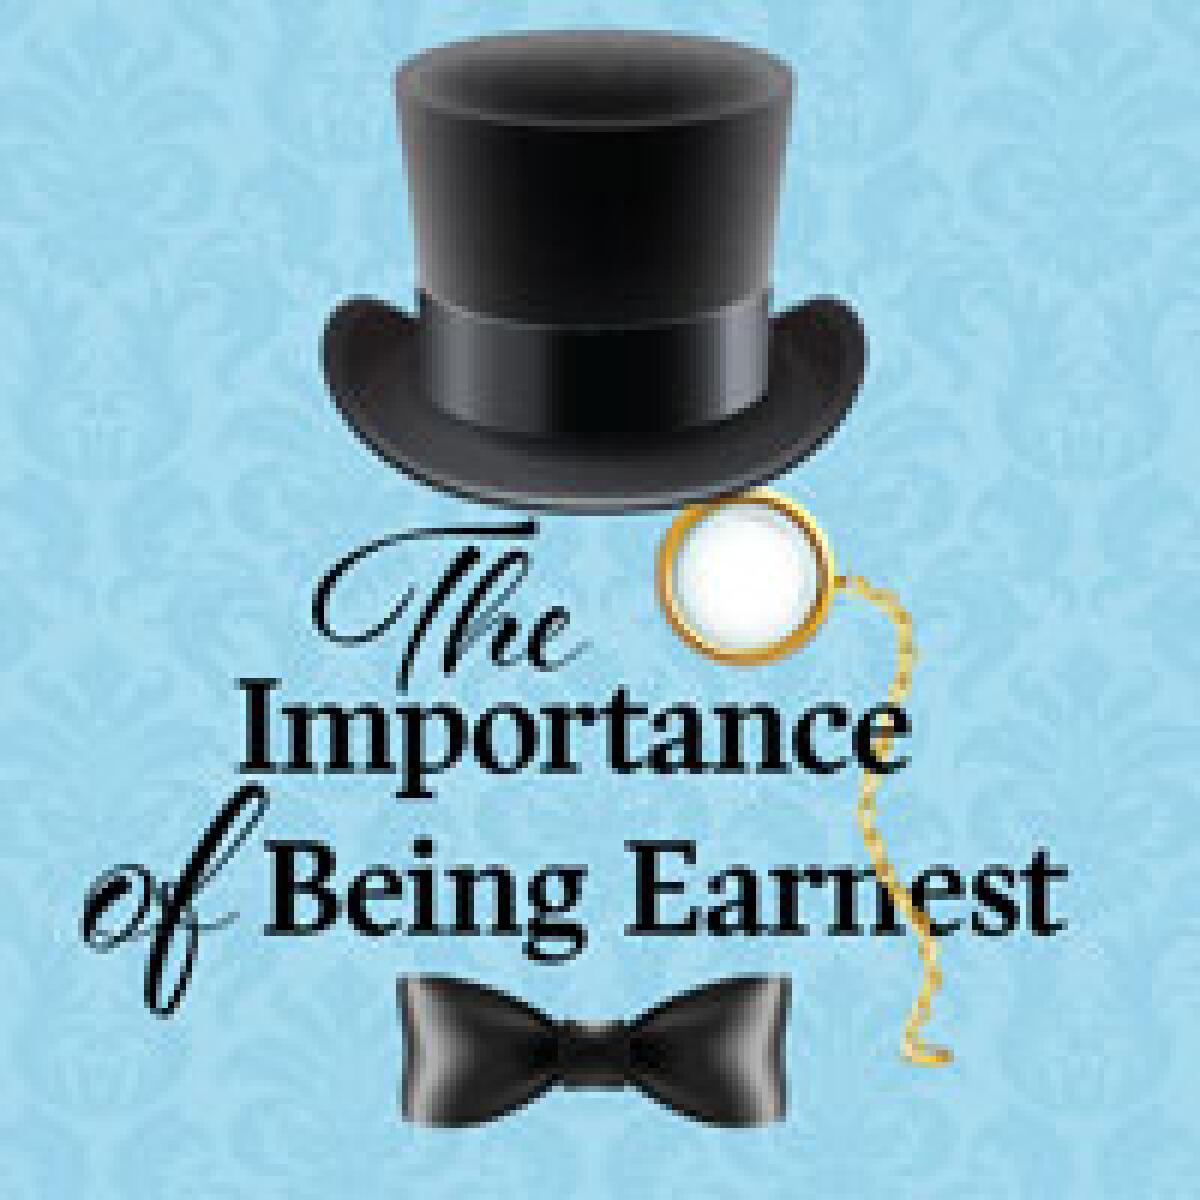 “The Importance of Being Earnest” will be held Friday, Oct. 11, 7 p.m., Saturday, Oct. 12, 1 p.m. and 5 p.m., and Sunday, Oct. 13, 2 p.m.